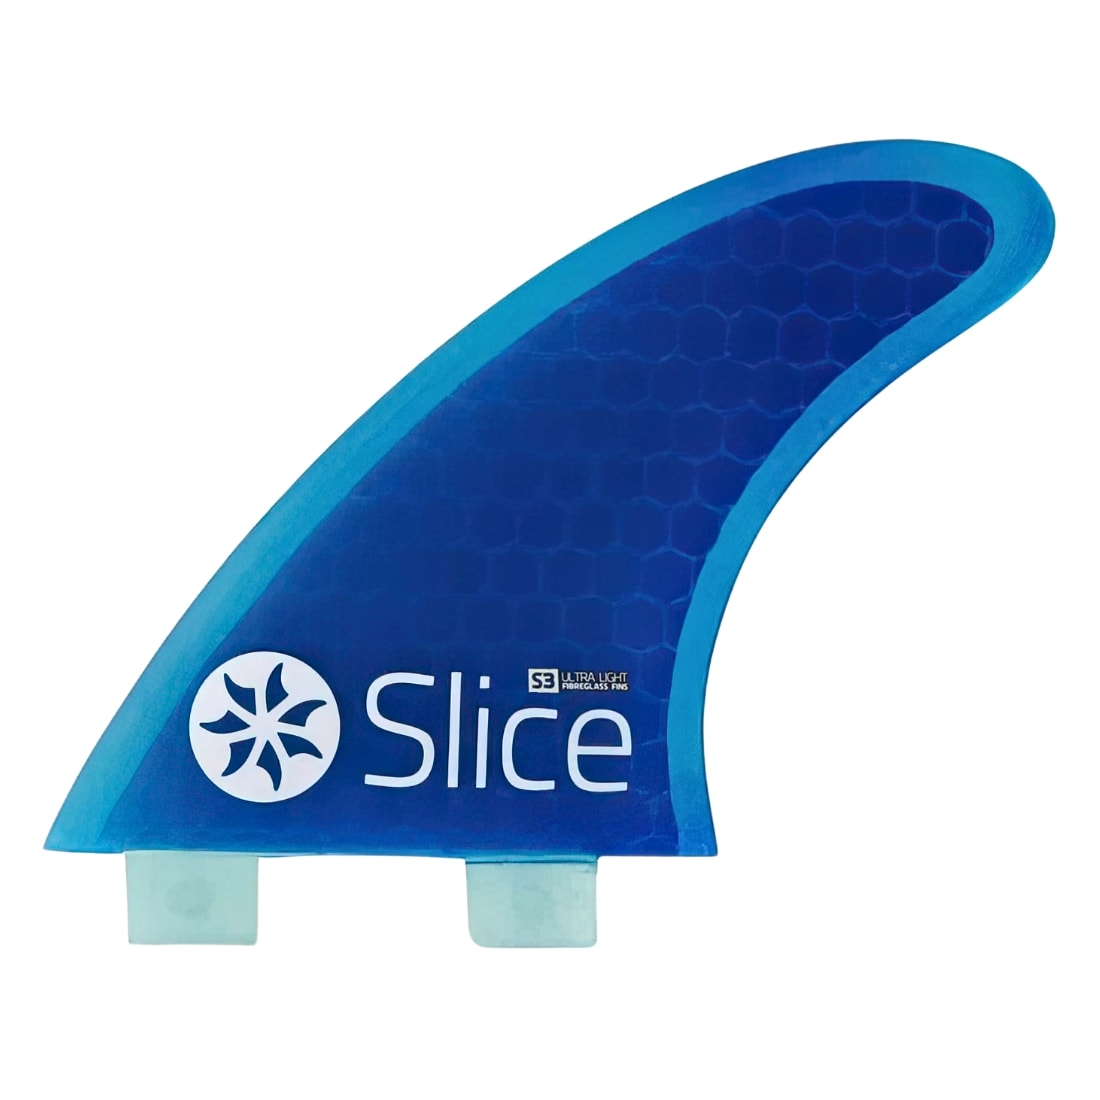 Northcore Slice Ultralight Hex Core S3 FCS Compatible Surfboard Fins - Blue - FCS 1 Fins by Northcore Small Fins